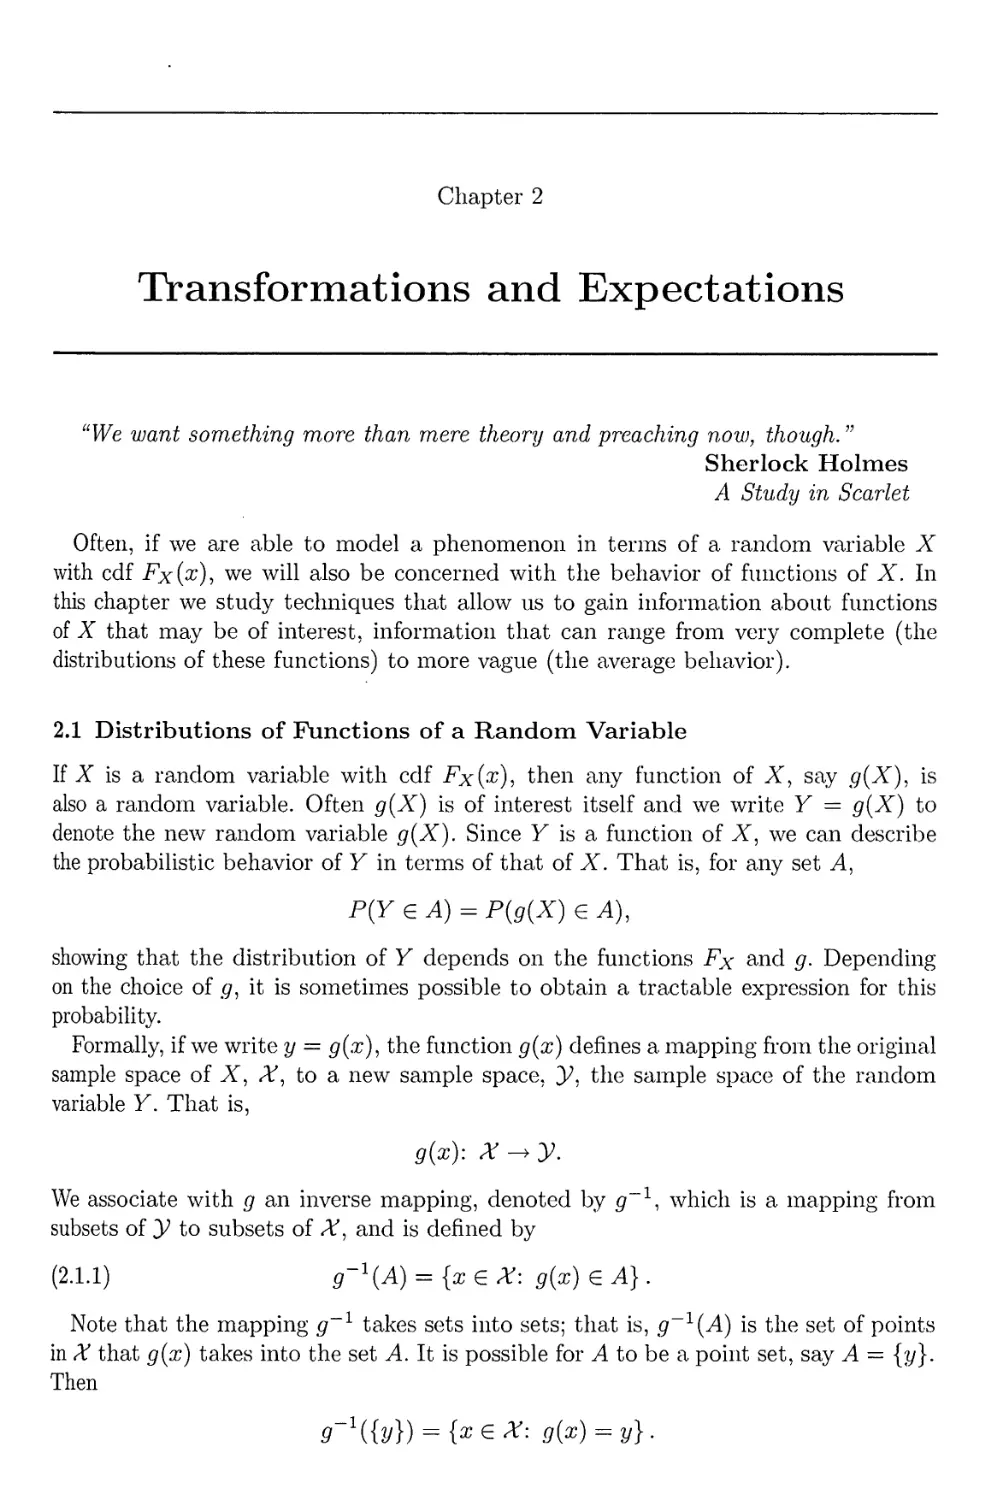 2. Transformations and Expectations